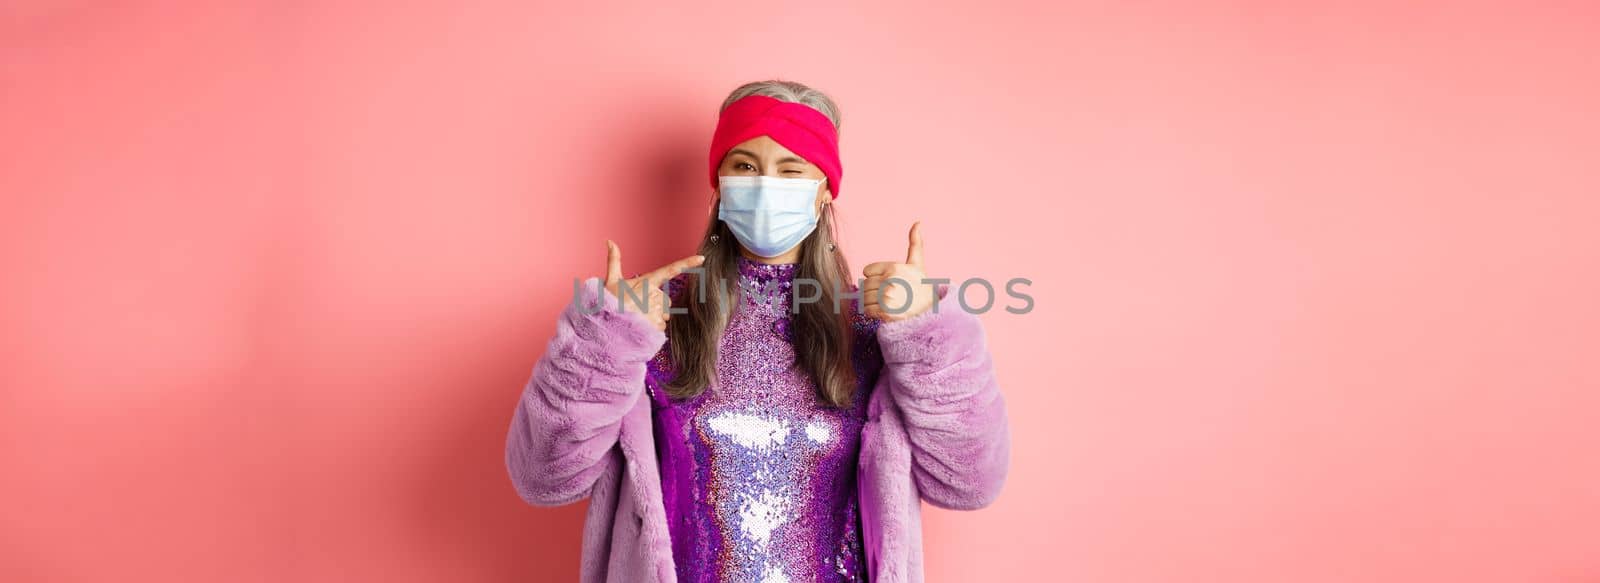 Covid-19, social distancing and fashion concept. Smiling asian senior woman in fashionable clothes and respirator, pointing at face mask and show thumb-up, pink background.